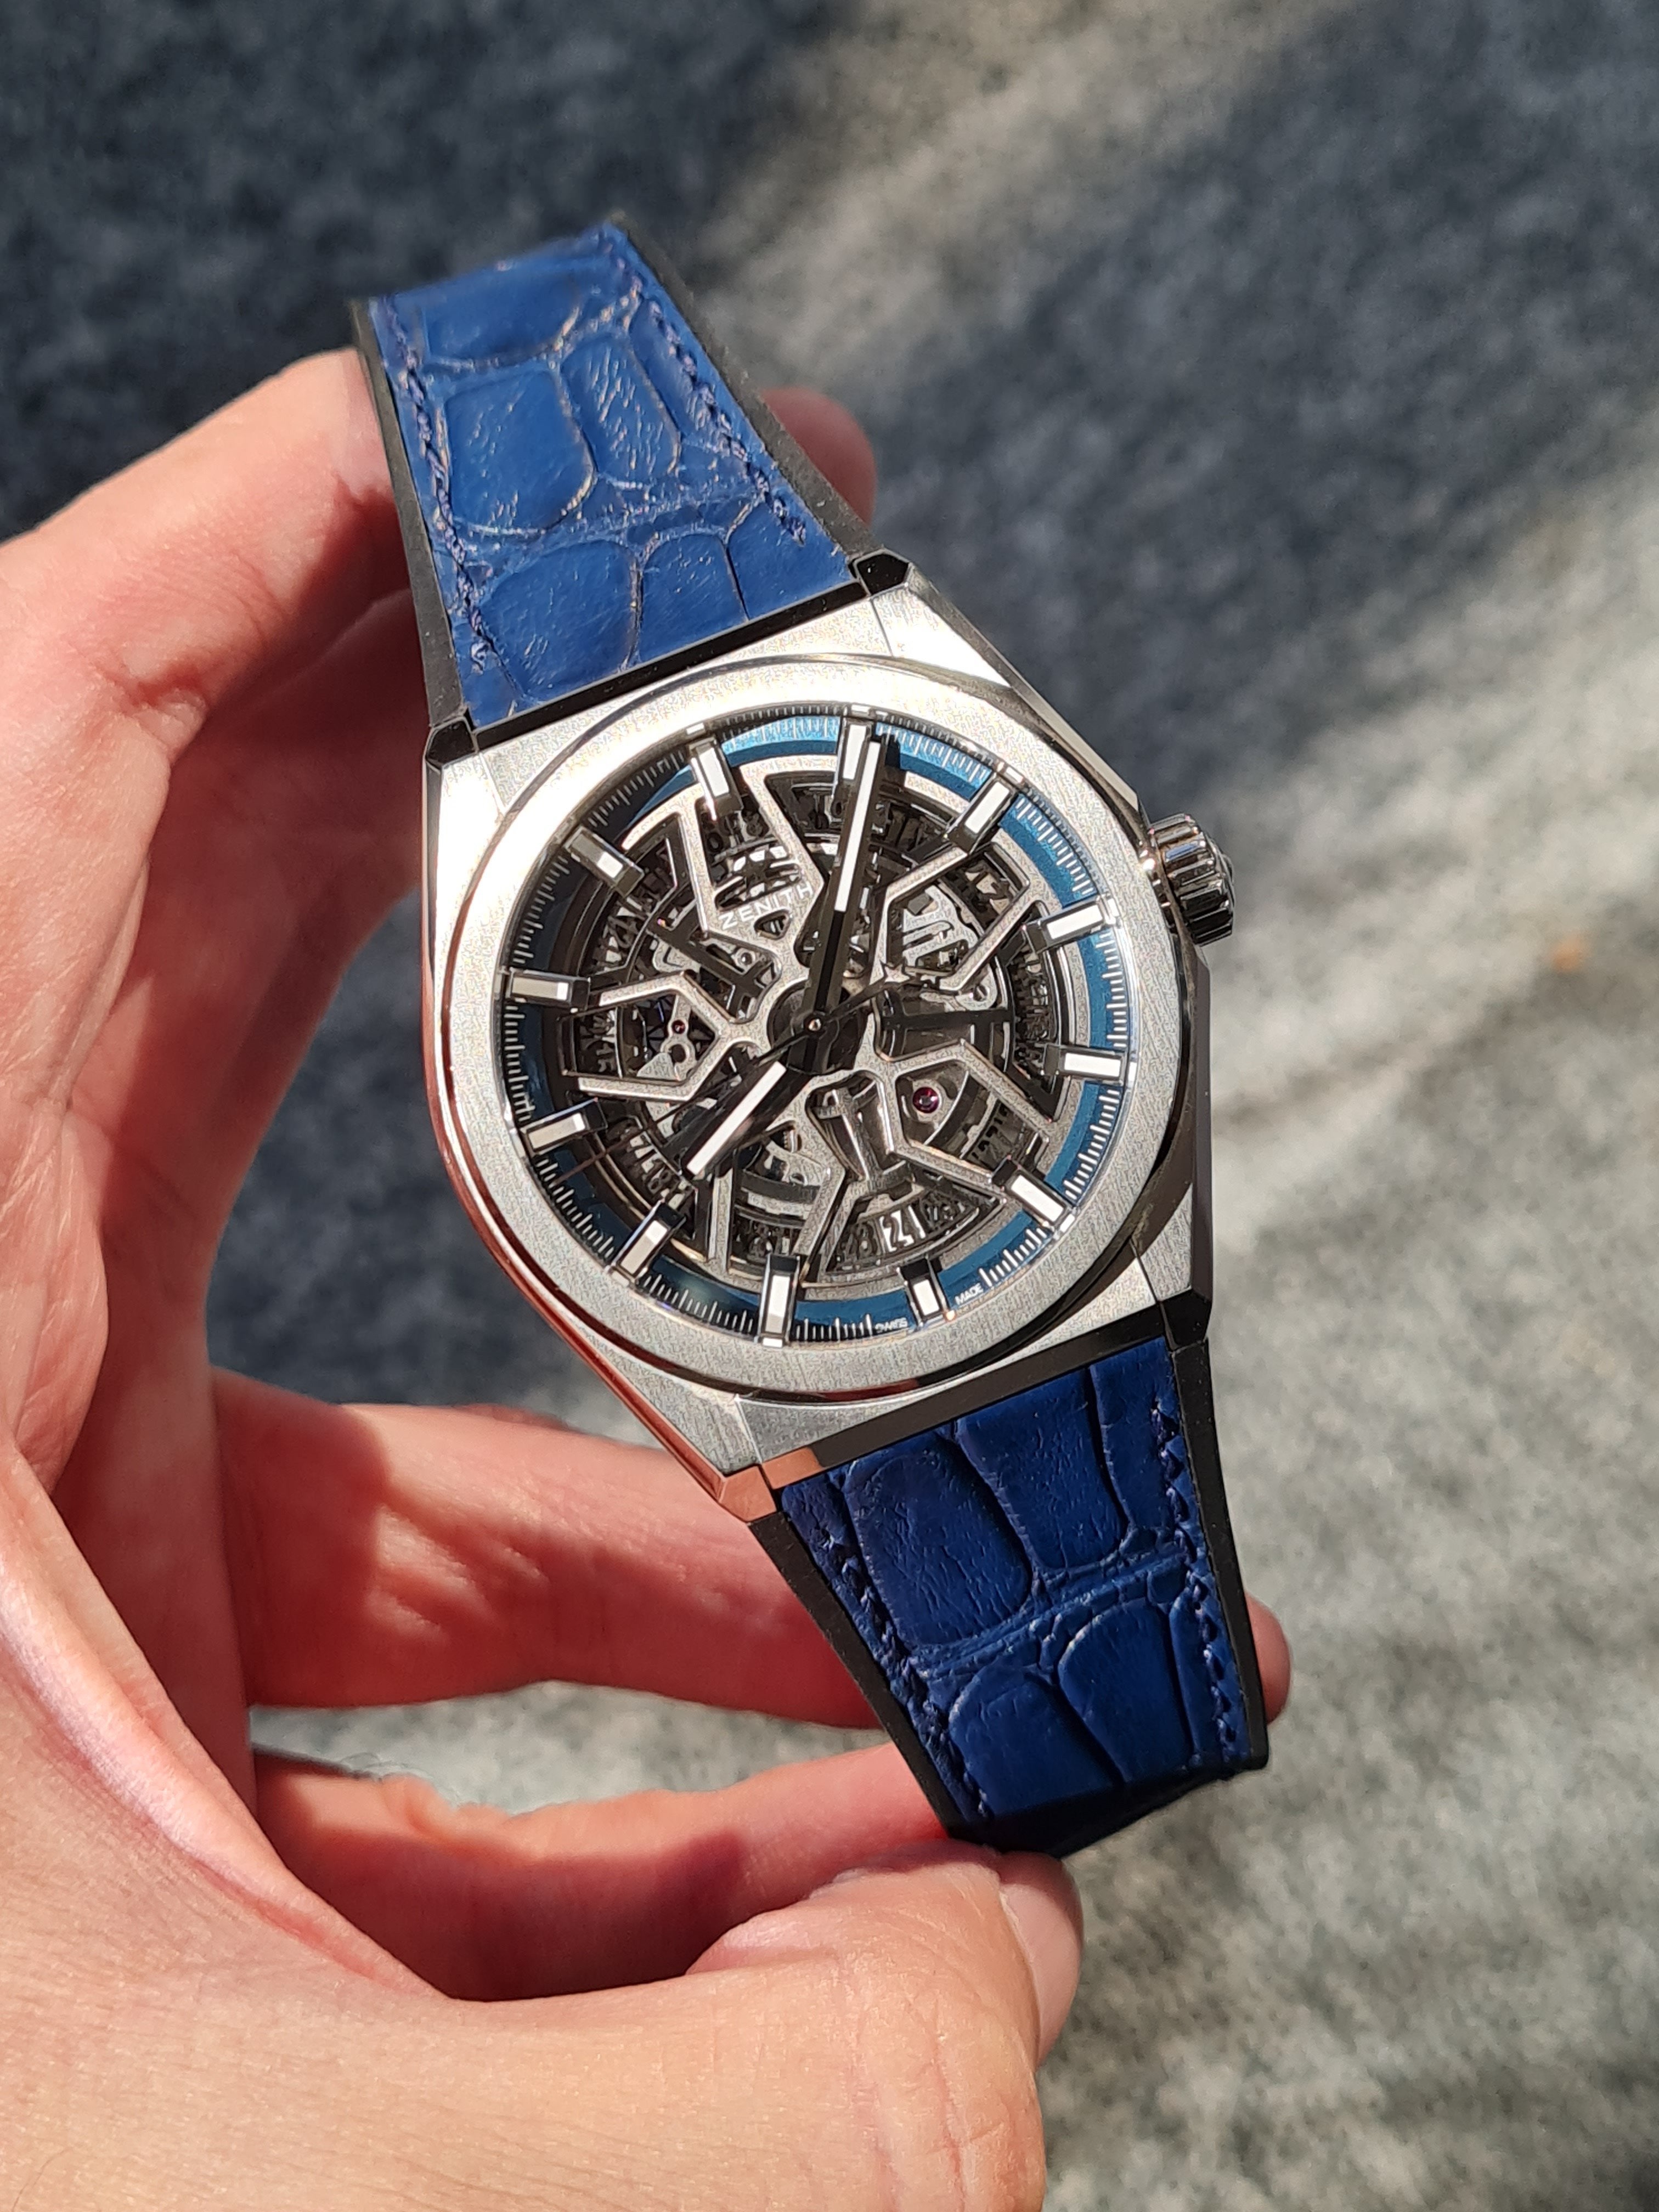 Zenith DEFY Classic 41mm: After a few weeks of wearing